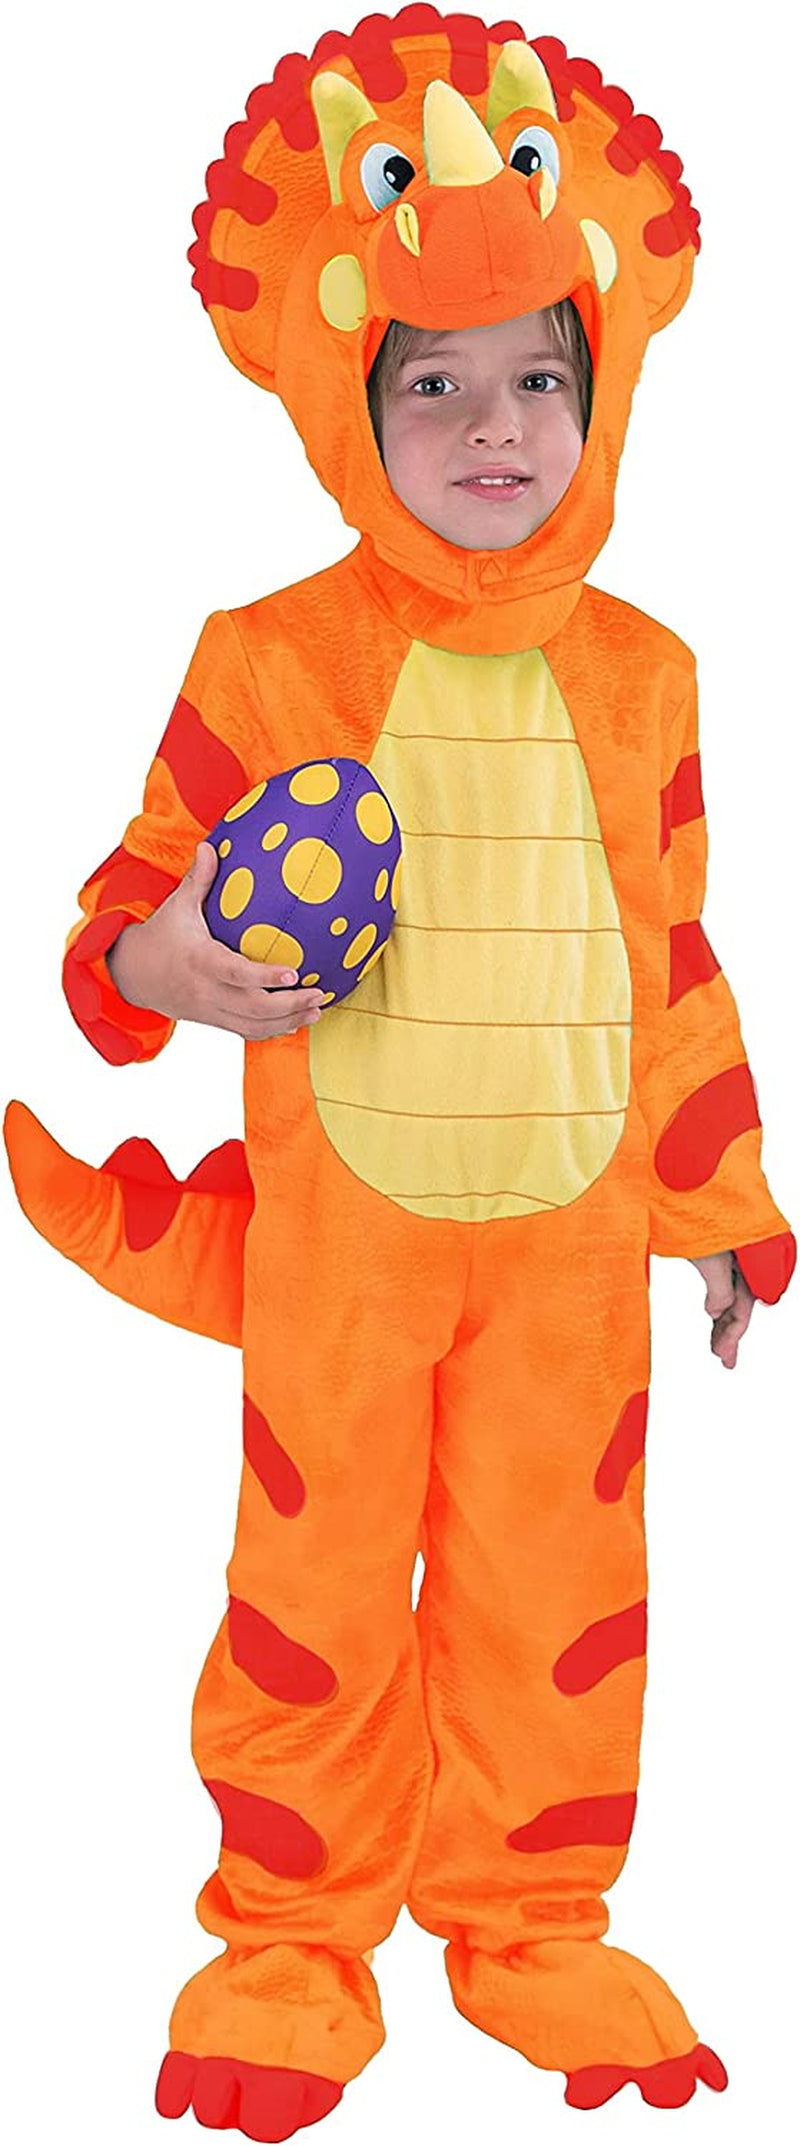 Spooktacular Creations Green Triceratops Dinosaur Costume with Toy Egg for Kid Halloween Dress up Dino Themed Pretend Party (3T (3-4 Yrs))  Joyin Inc Orange 3T(3-4 Yrs) 